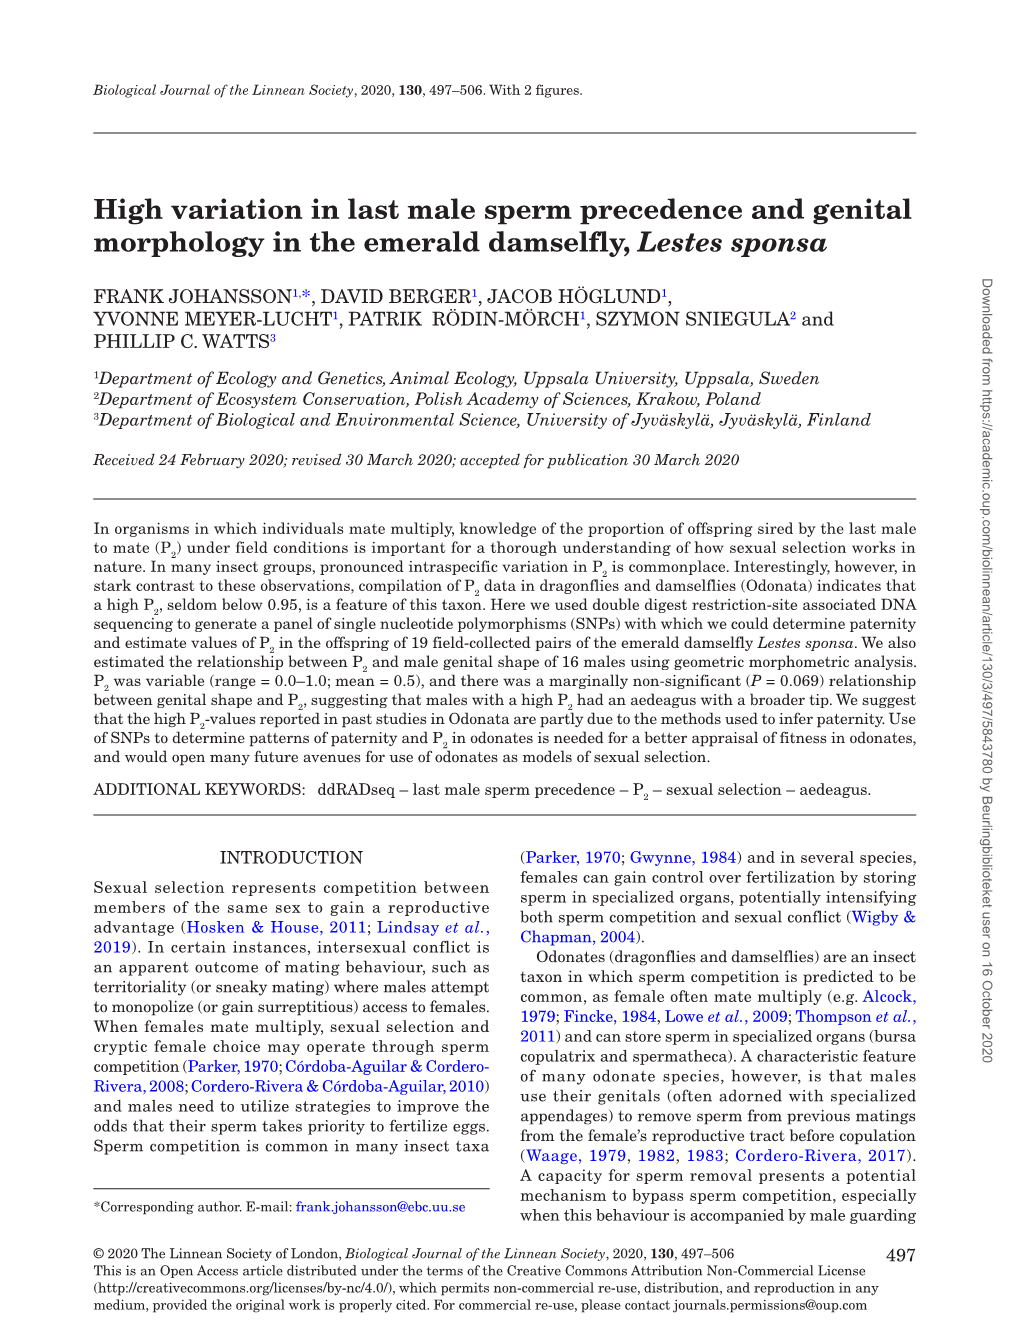 High Variation in Last Male Sperm Precedence and Genital